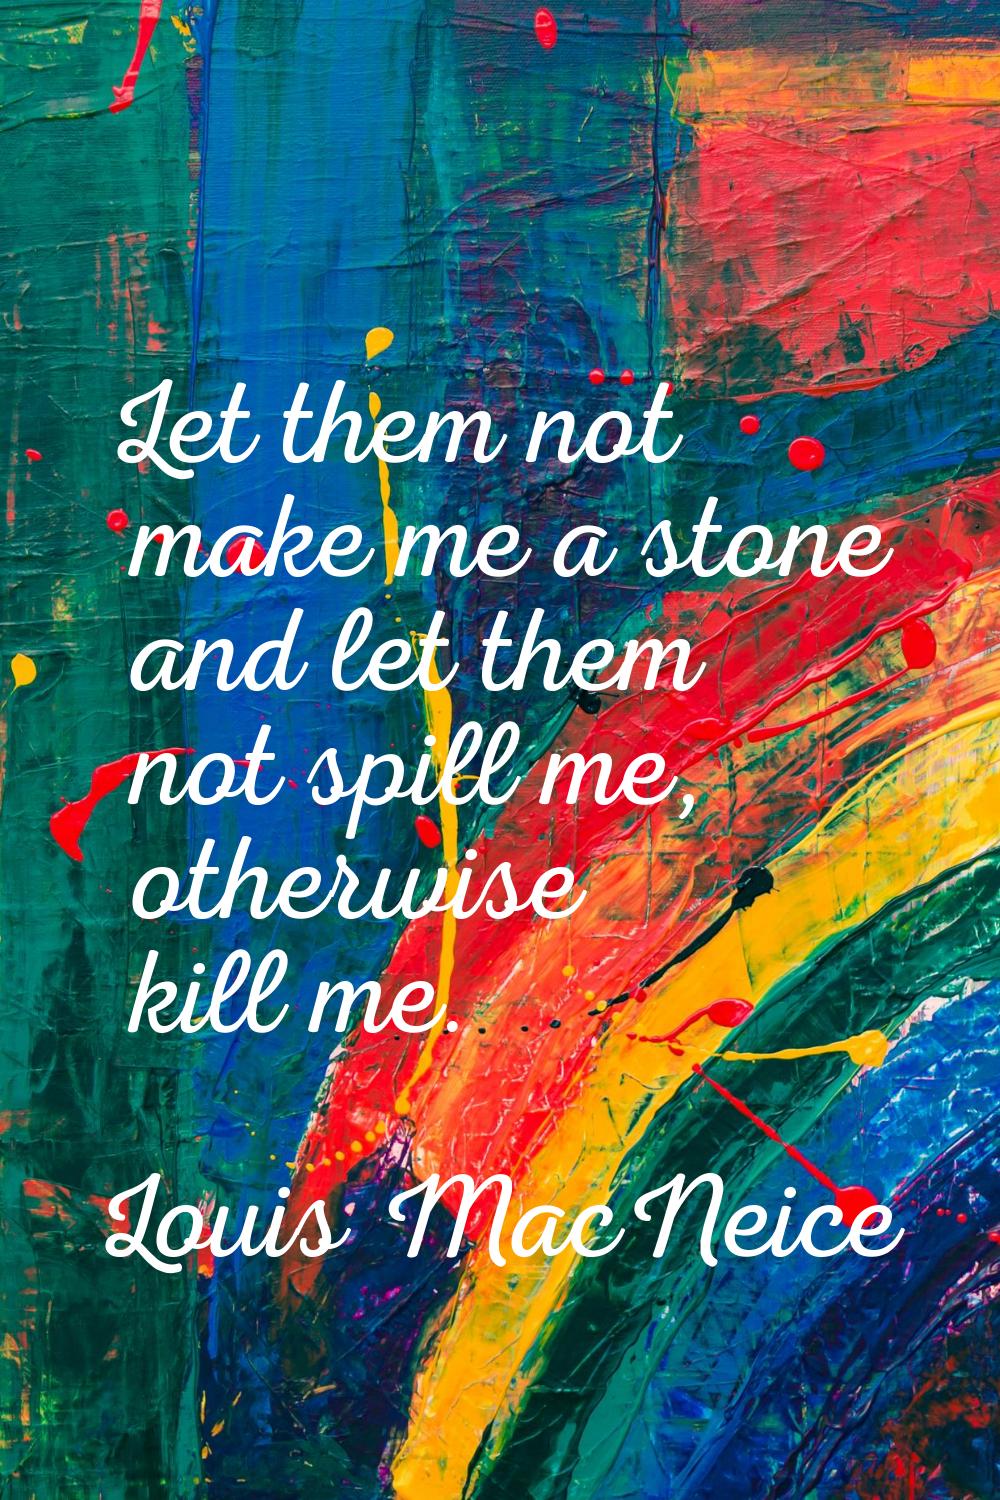 Let them not make me a stone and let them not spill me, otherwise kill me.